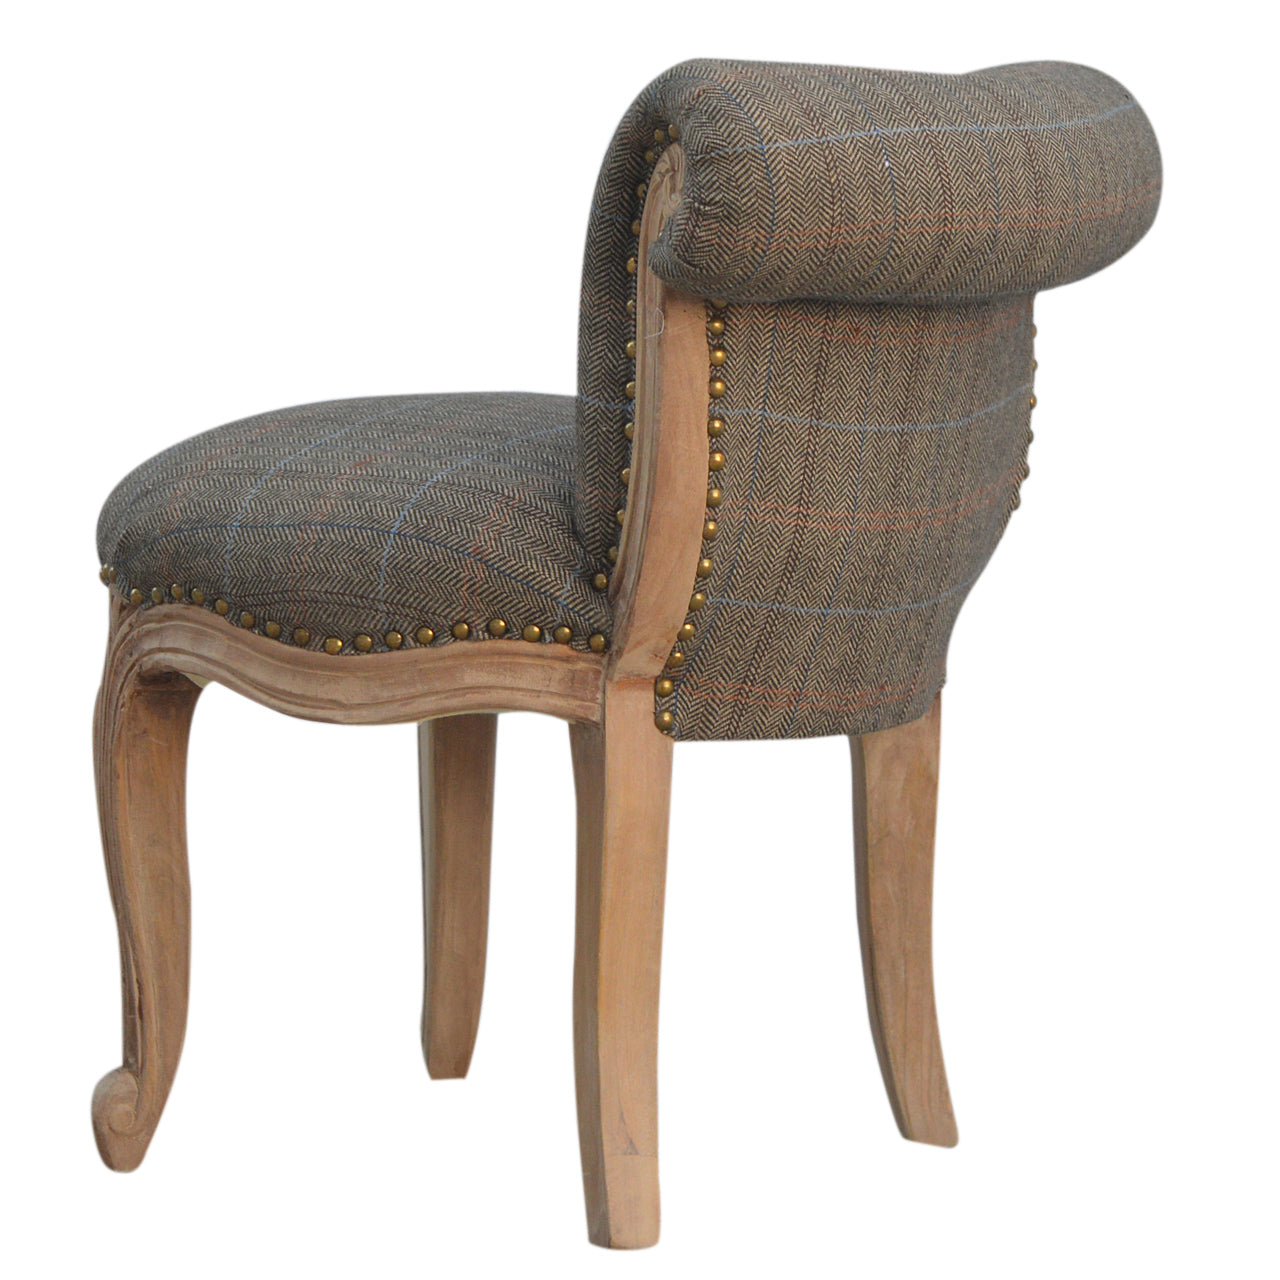 Small Multi Tweed French Chair - mancavesuperstore